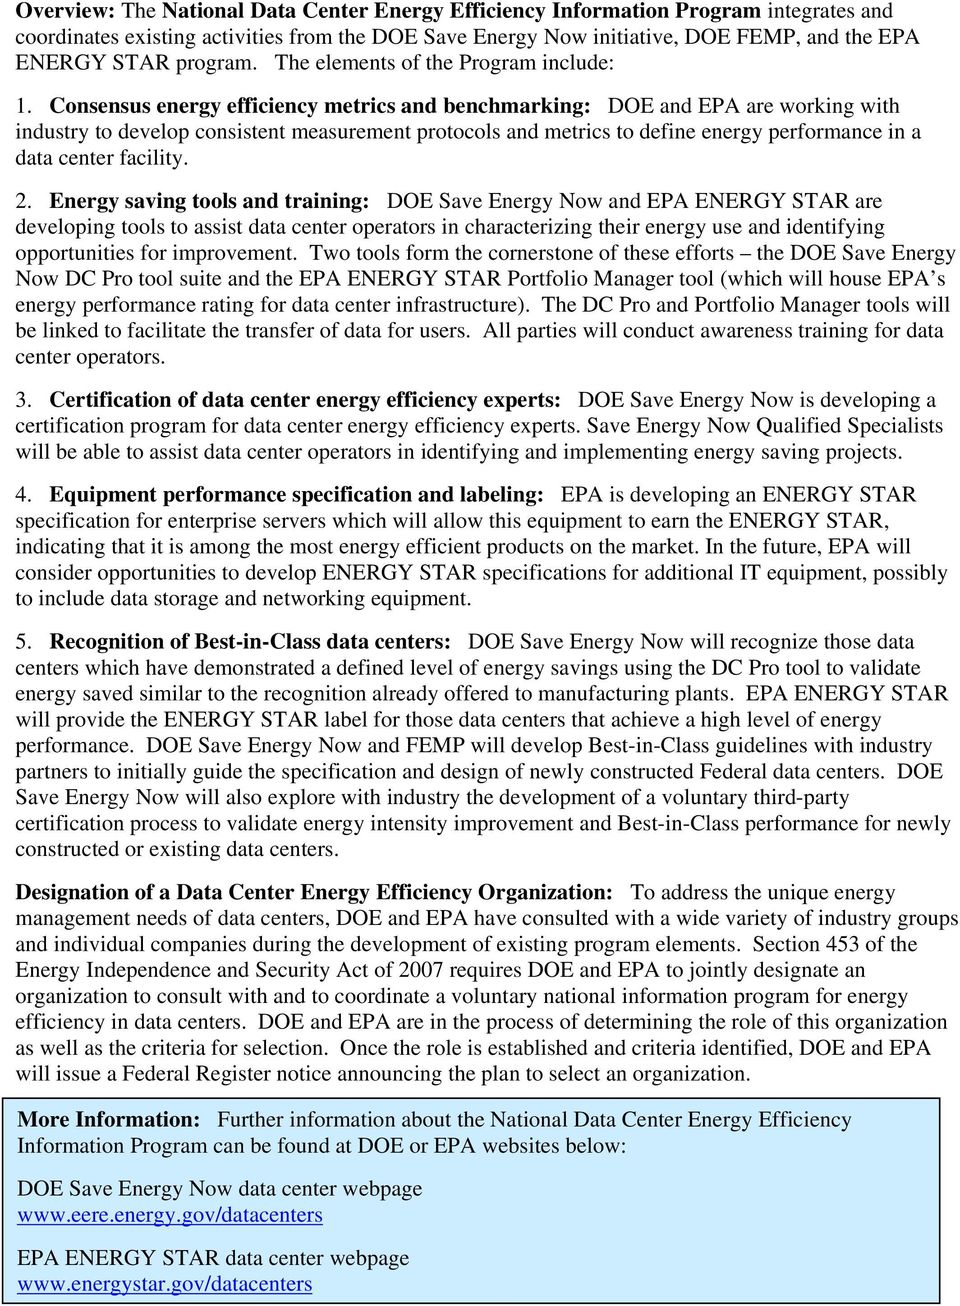 Consensus energy efficiency metrics and benchmarking: DOE and EPA are working with industry to develop consistent measurement protocols and metrics to define energy performance in a data center